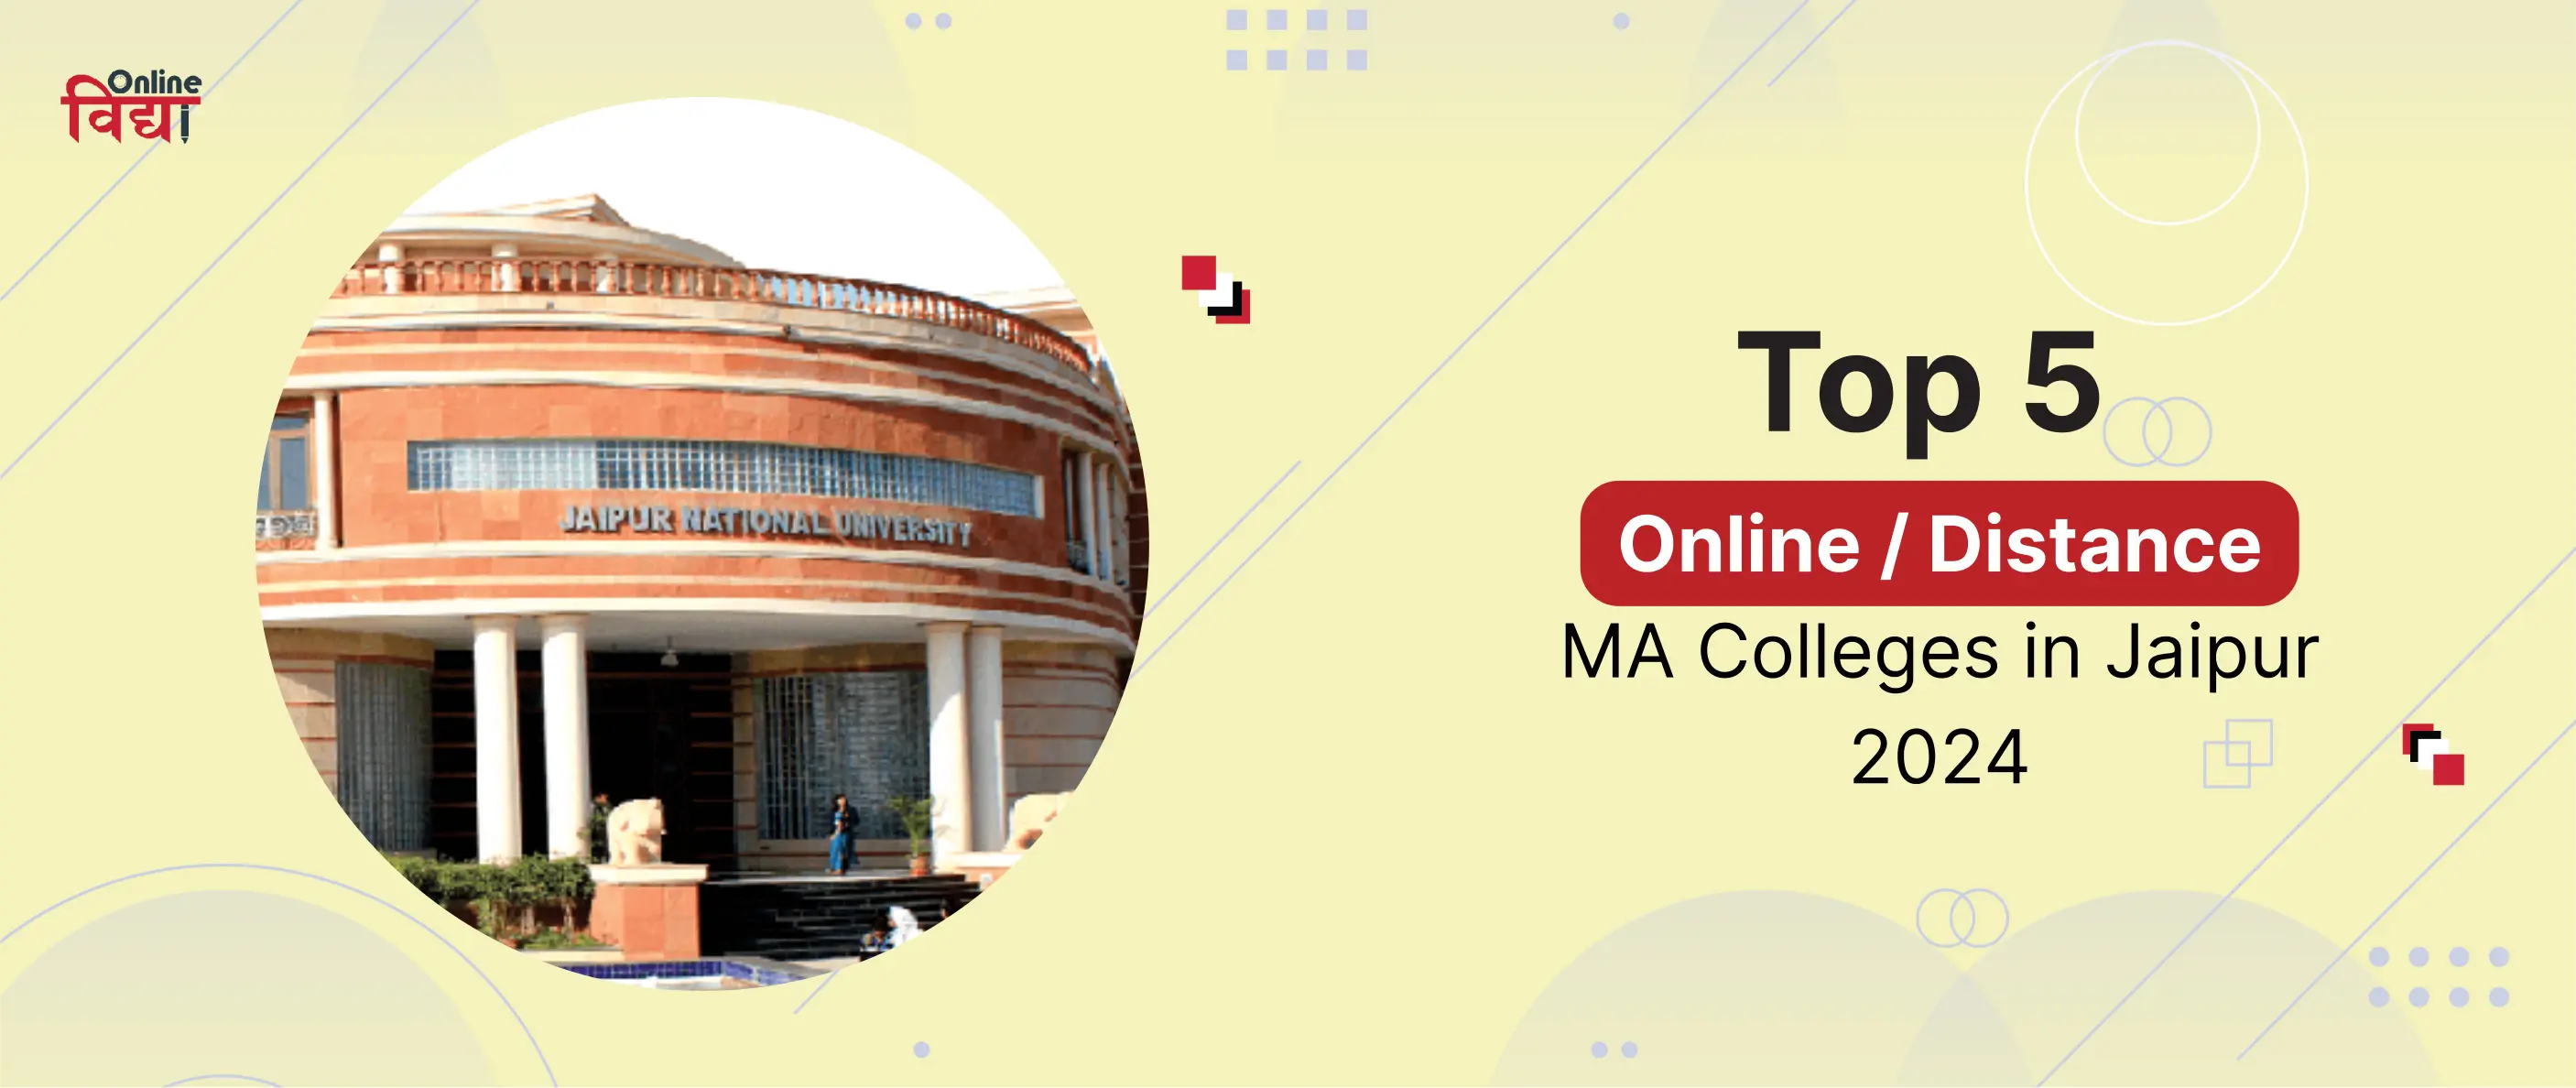 Top 5 Online/Distance MA Colleges in Jaipur 2024